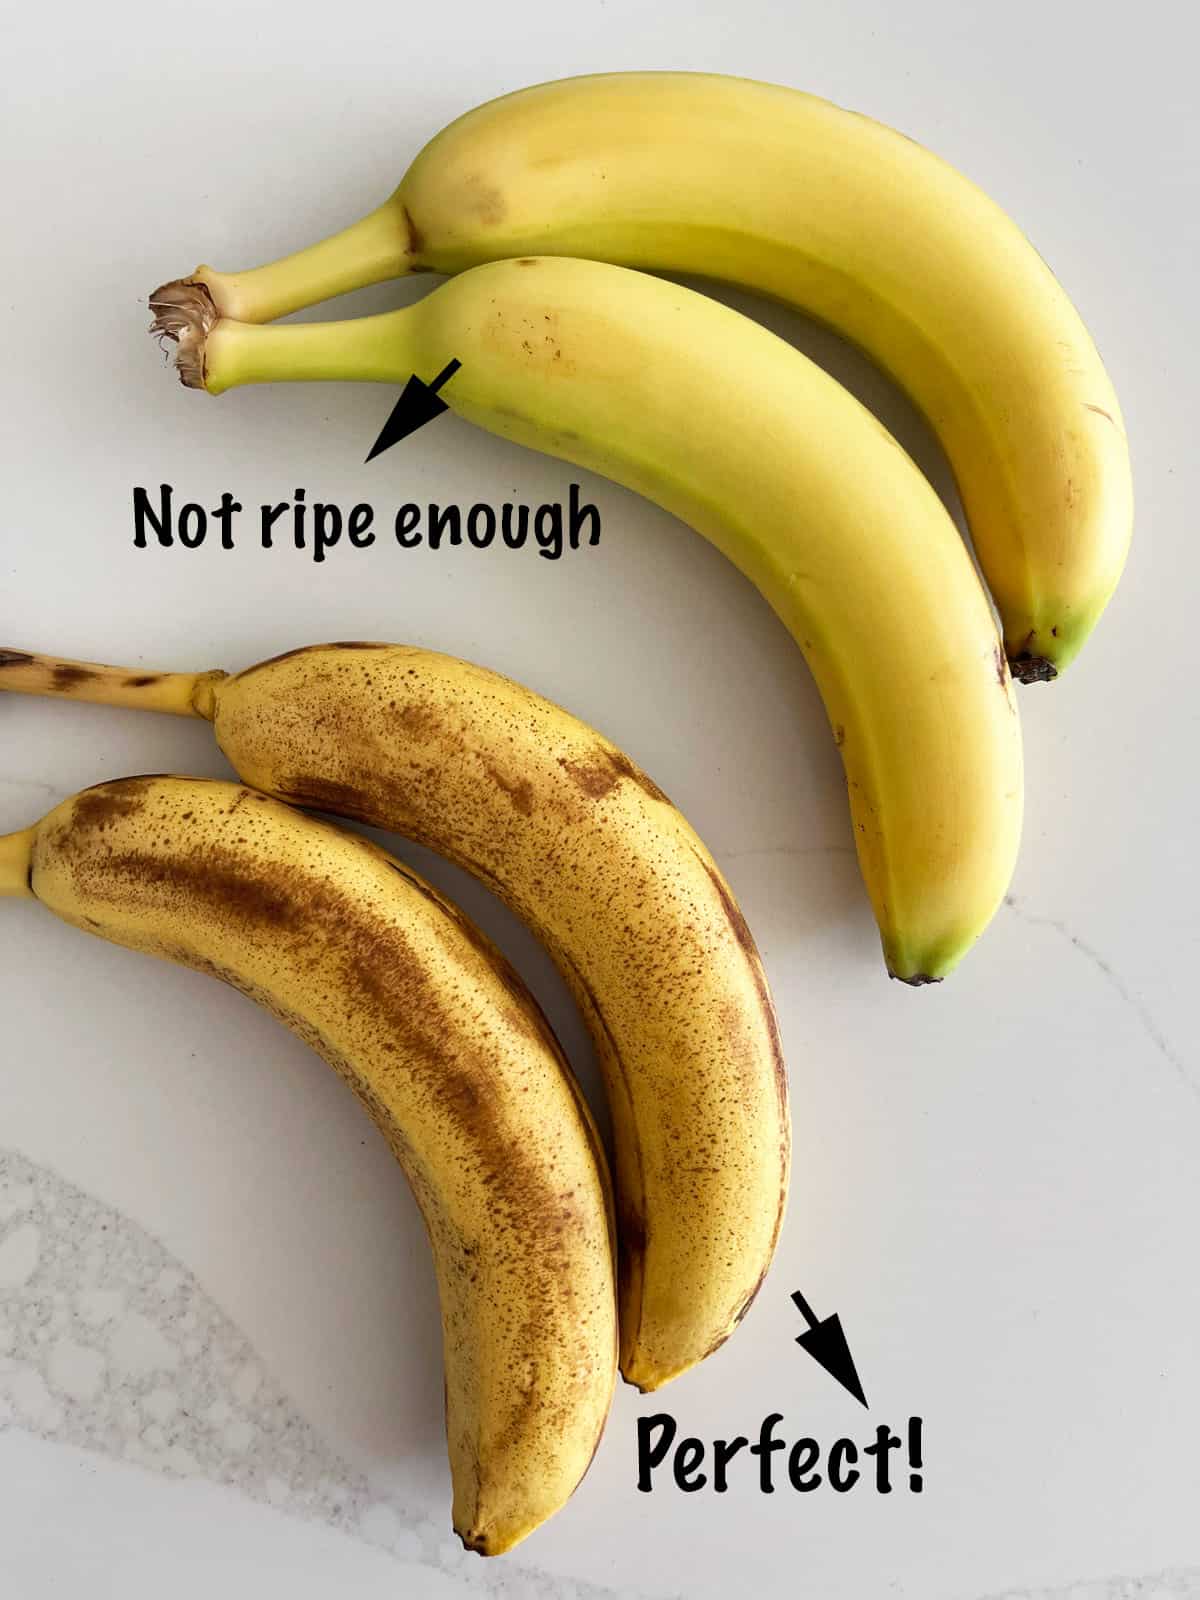 Two bananas that are not ripe enough for banana bread and two that are just right.